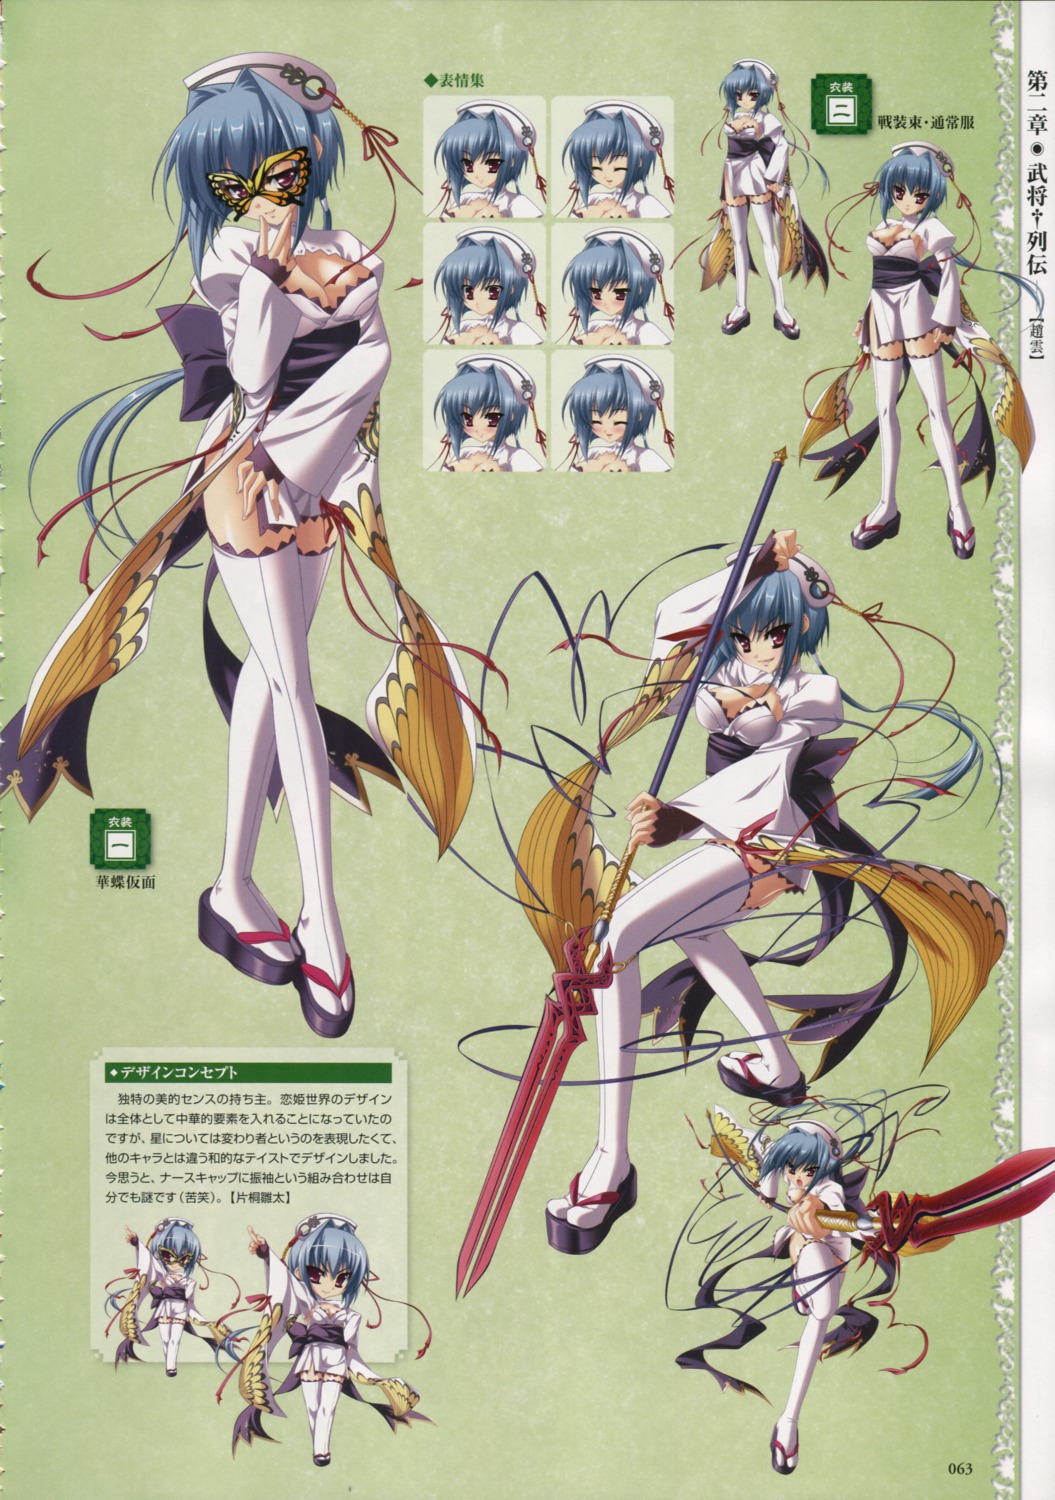 asian_clothes baseson character_design chibi chouun cleavage expression koihime_musou thighhighs weapon